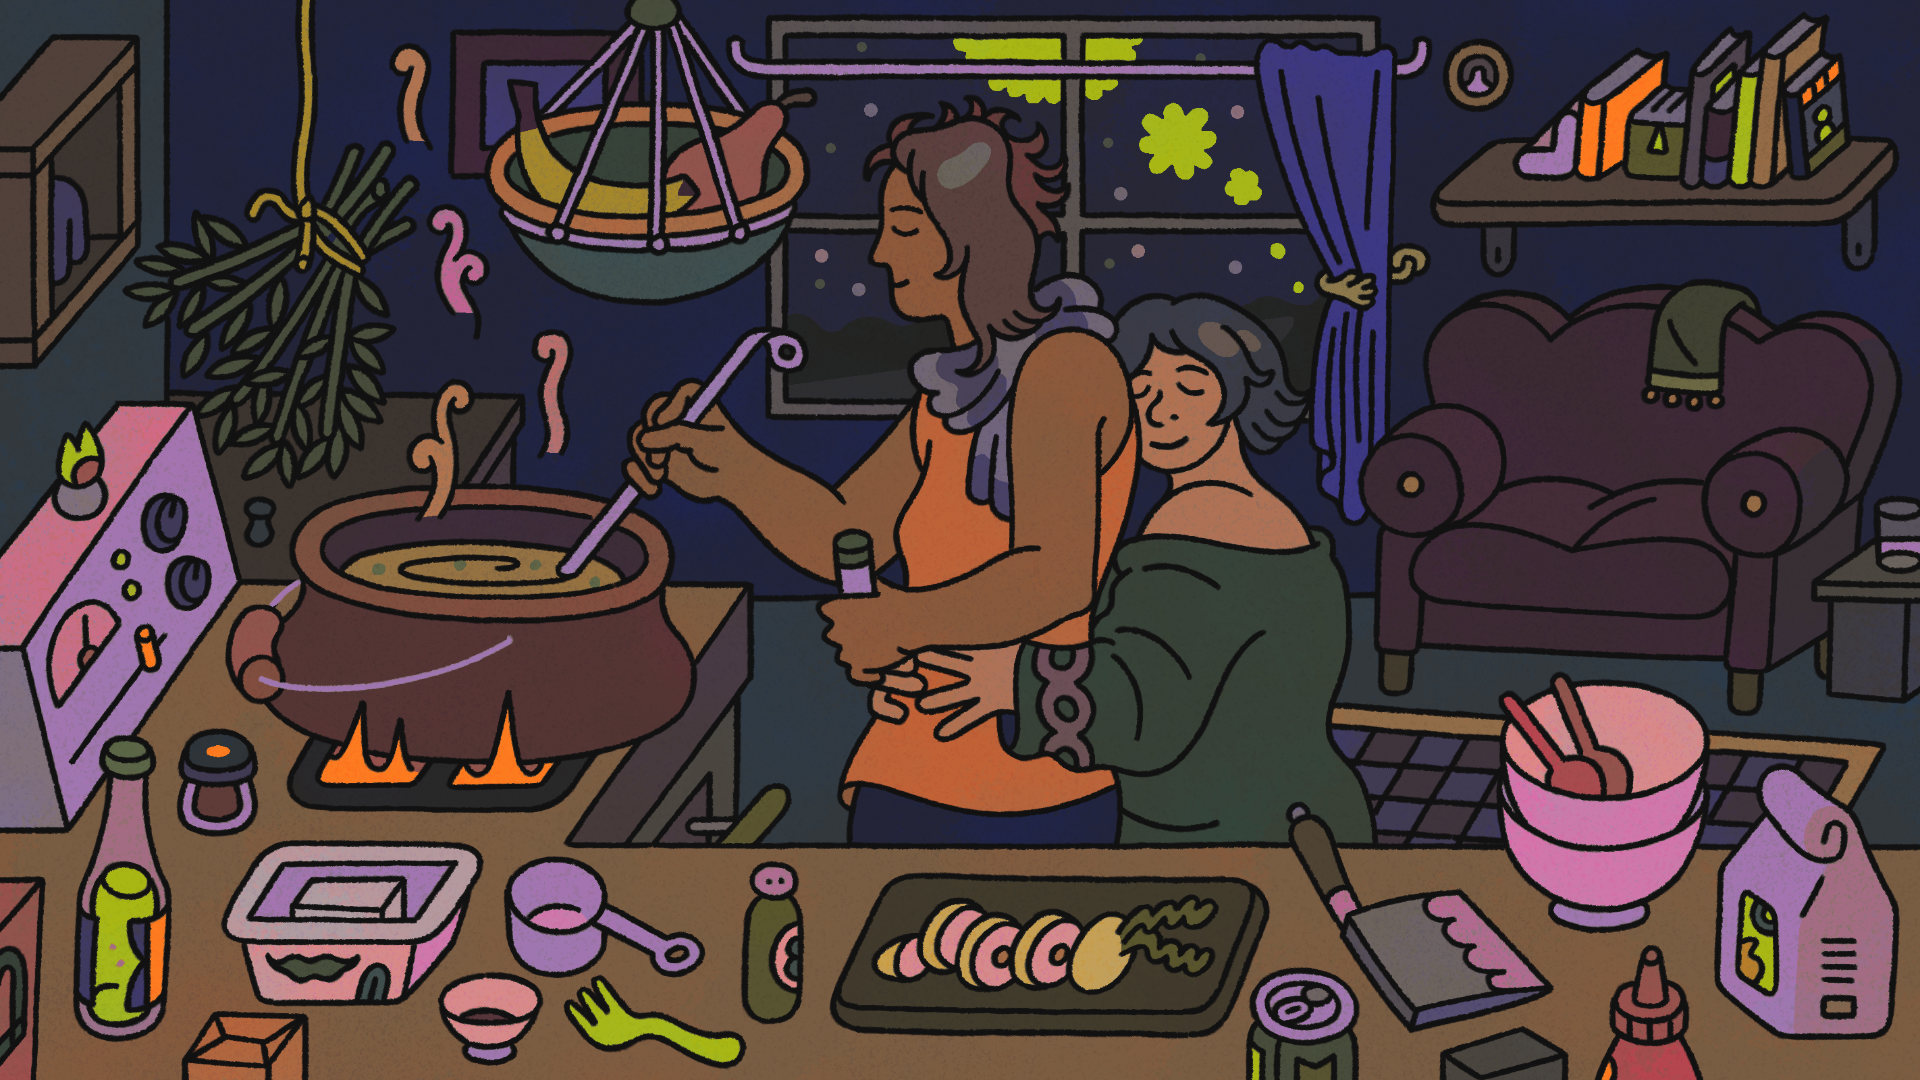 Illustration for Bossgame by Sophia Foster-Dimino. Sophie is holding Anna from behind while Anna cooks a pot full of soup on the kitchen stove. Both are smiling with eyes closed. Inside their apartment, it's night, and various things lay about - cooking ingredients, knives, plants, and such adorn the scene.